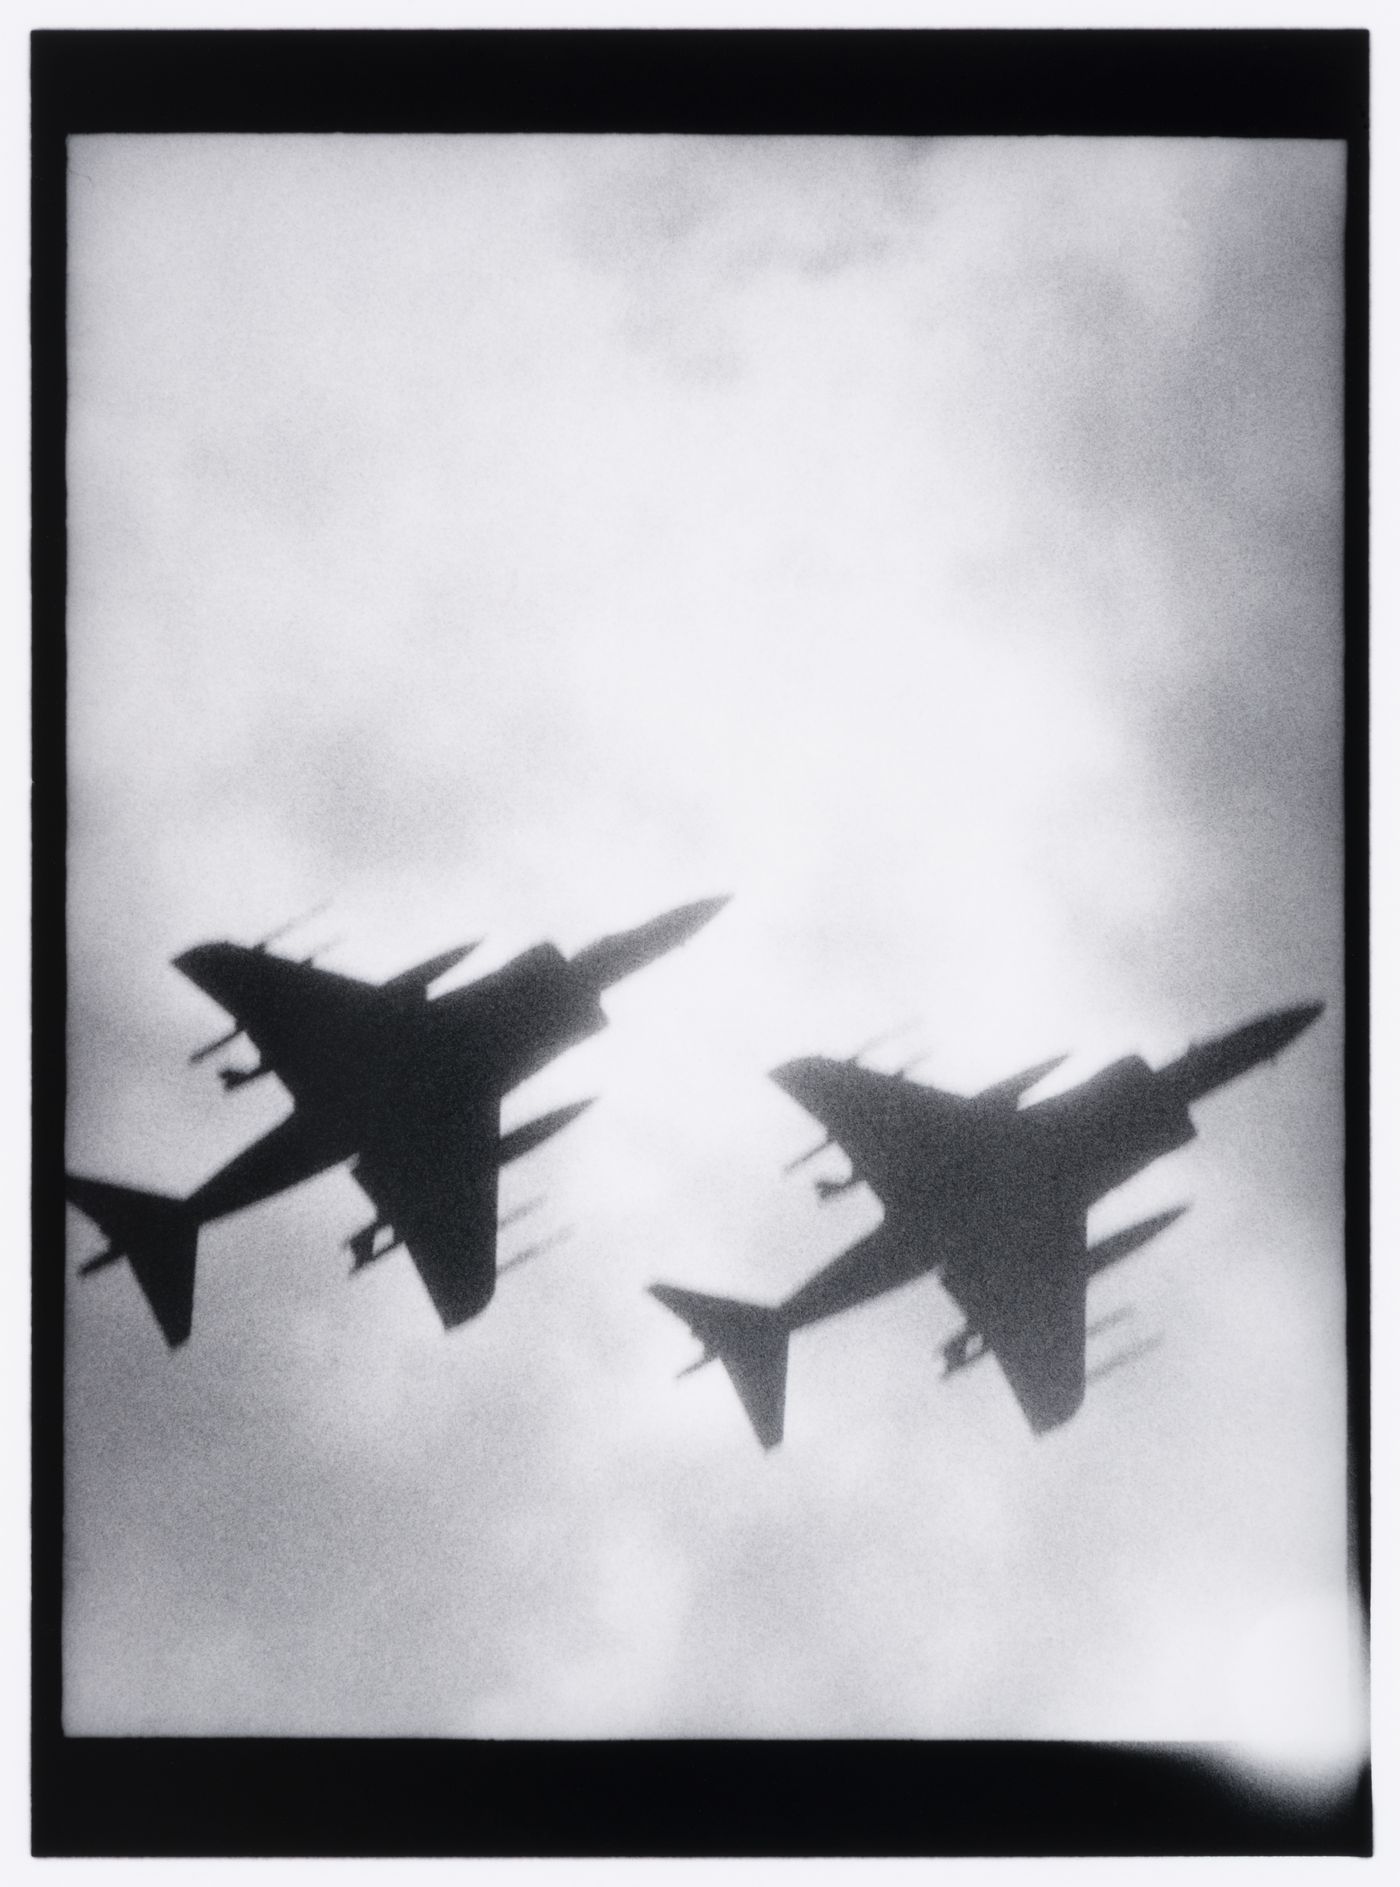 View of two jet fighters in flight, Washington D.C., United States, from the series "Empire"